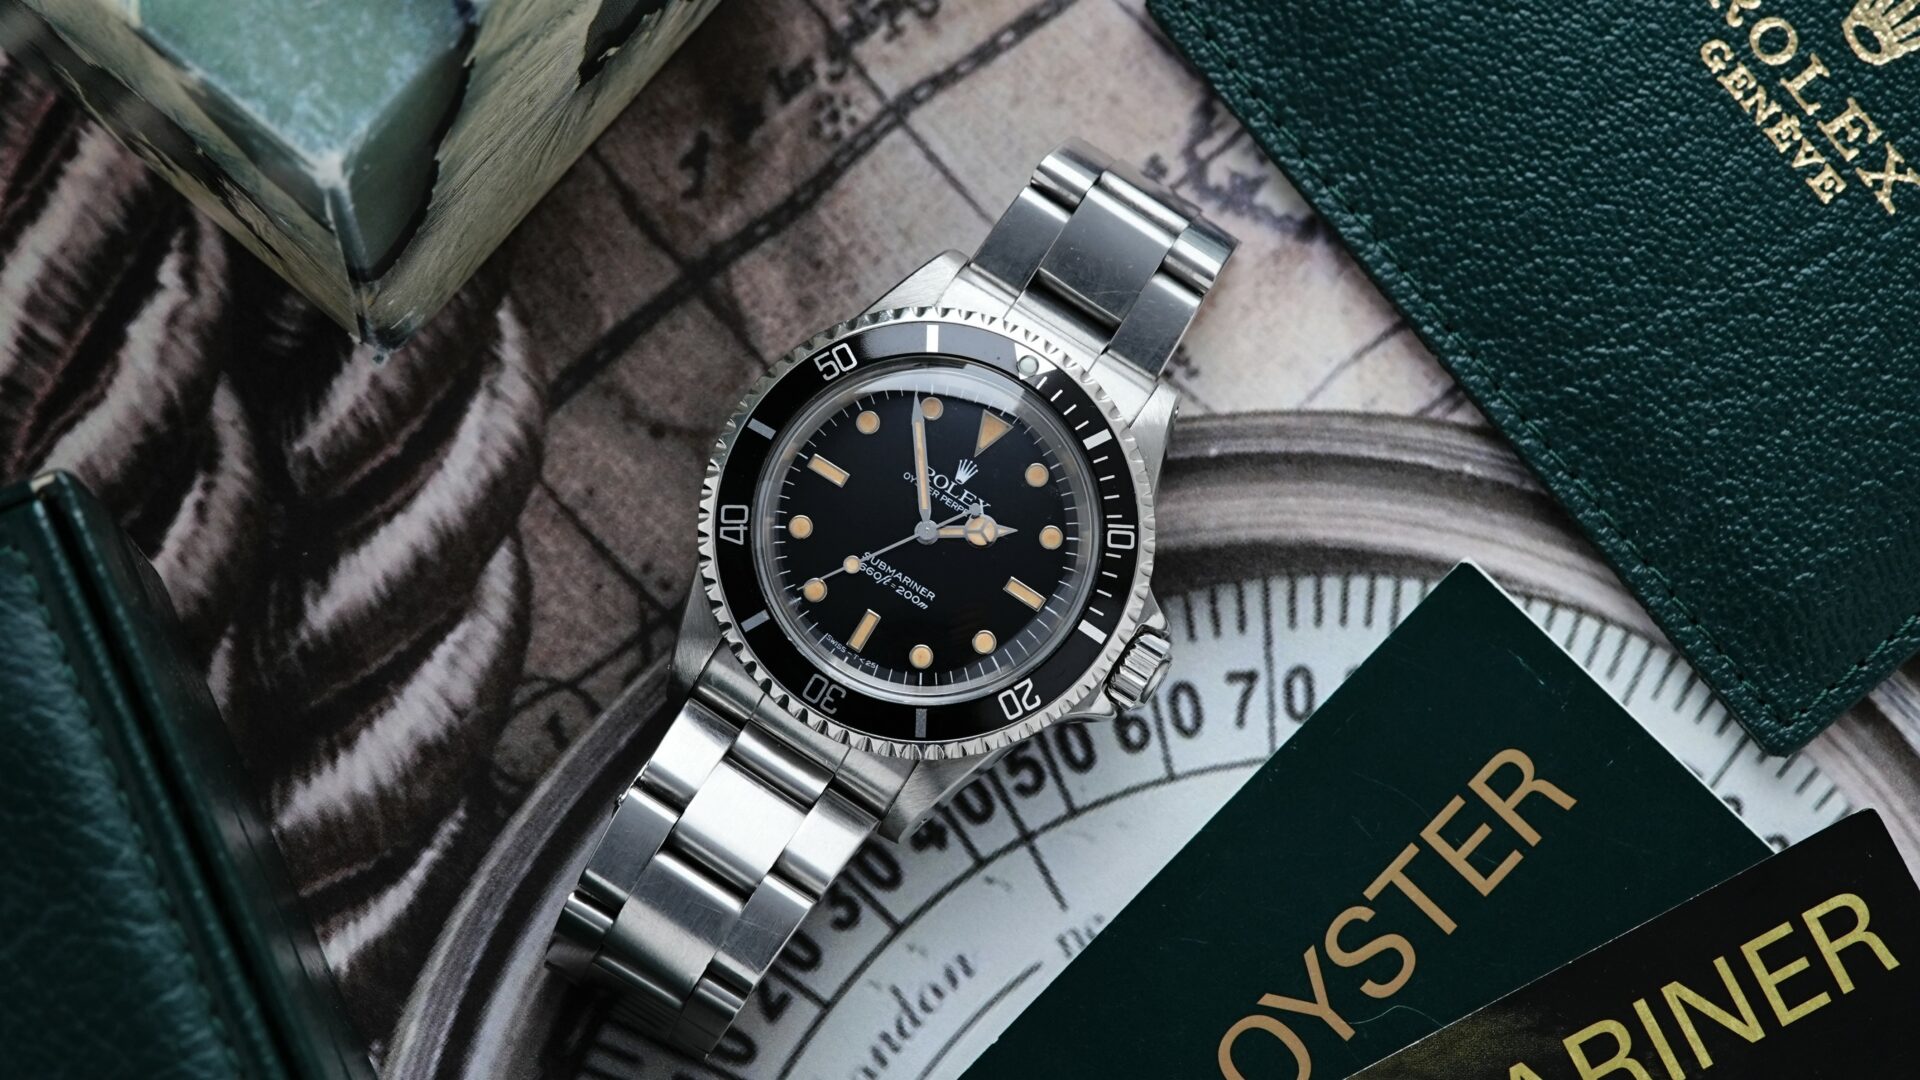 Rolex Submariner 5513 1979 Mark 3. Spider dial featured with unique background and original papers.